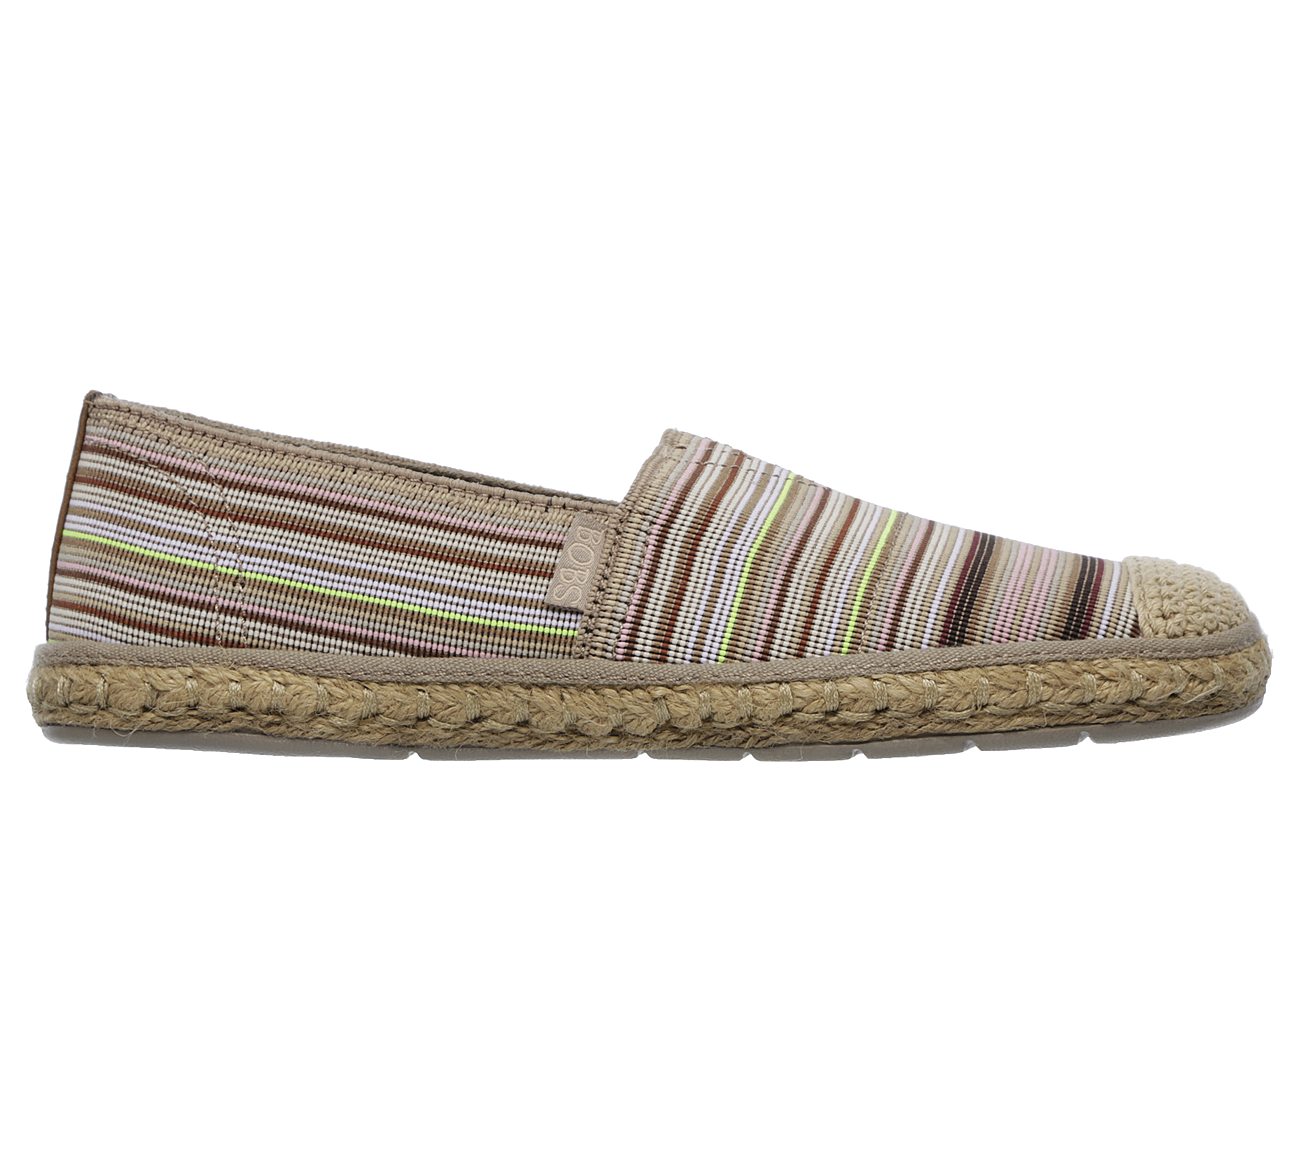 Buy SKECHERS Bobs Flexpadrille - Cabana Party BOBS Shoes